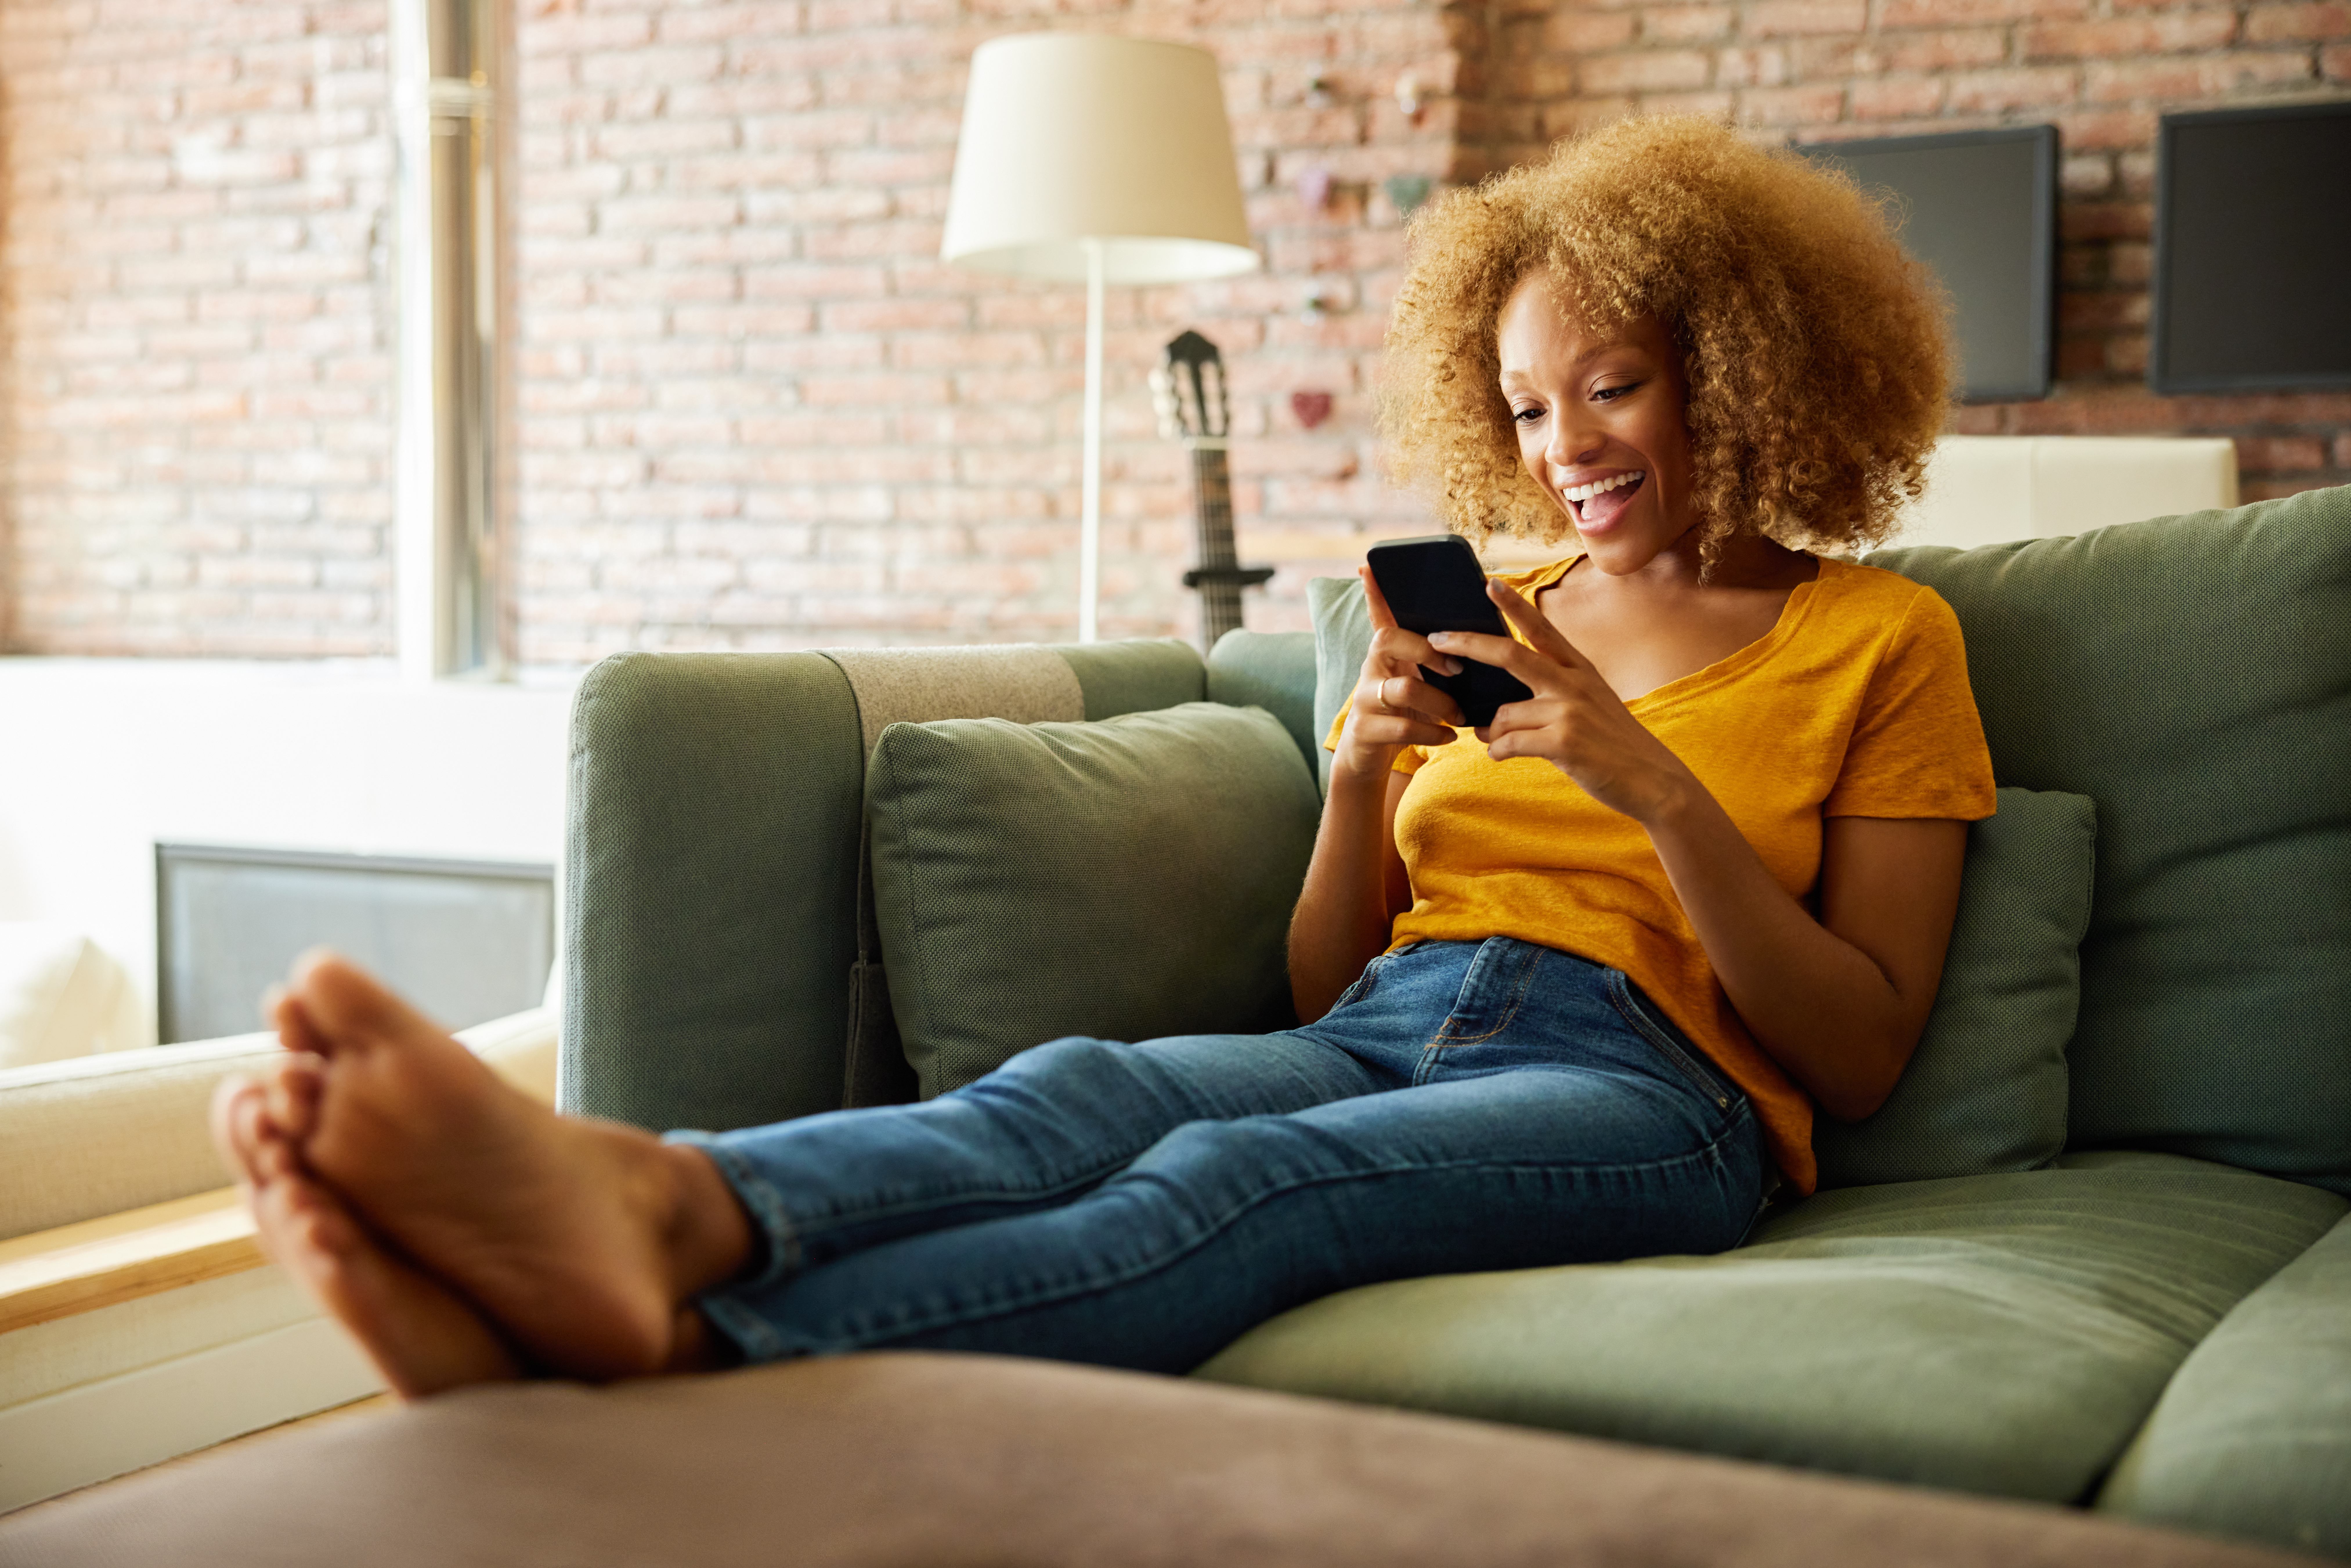 Cheerful woman text messaging through smart phone. Young female with curly hair in living room. She is sitting on sofa at home.